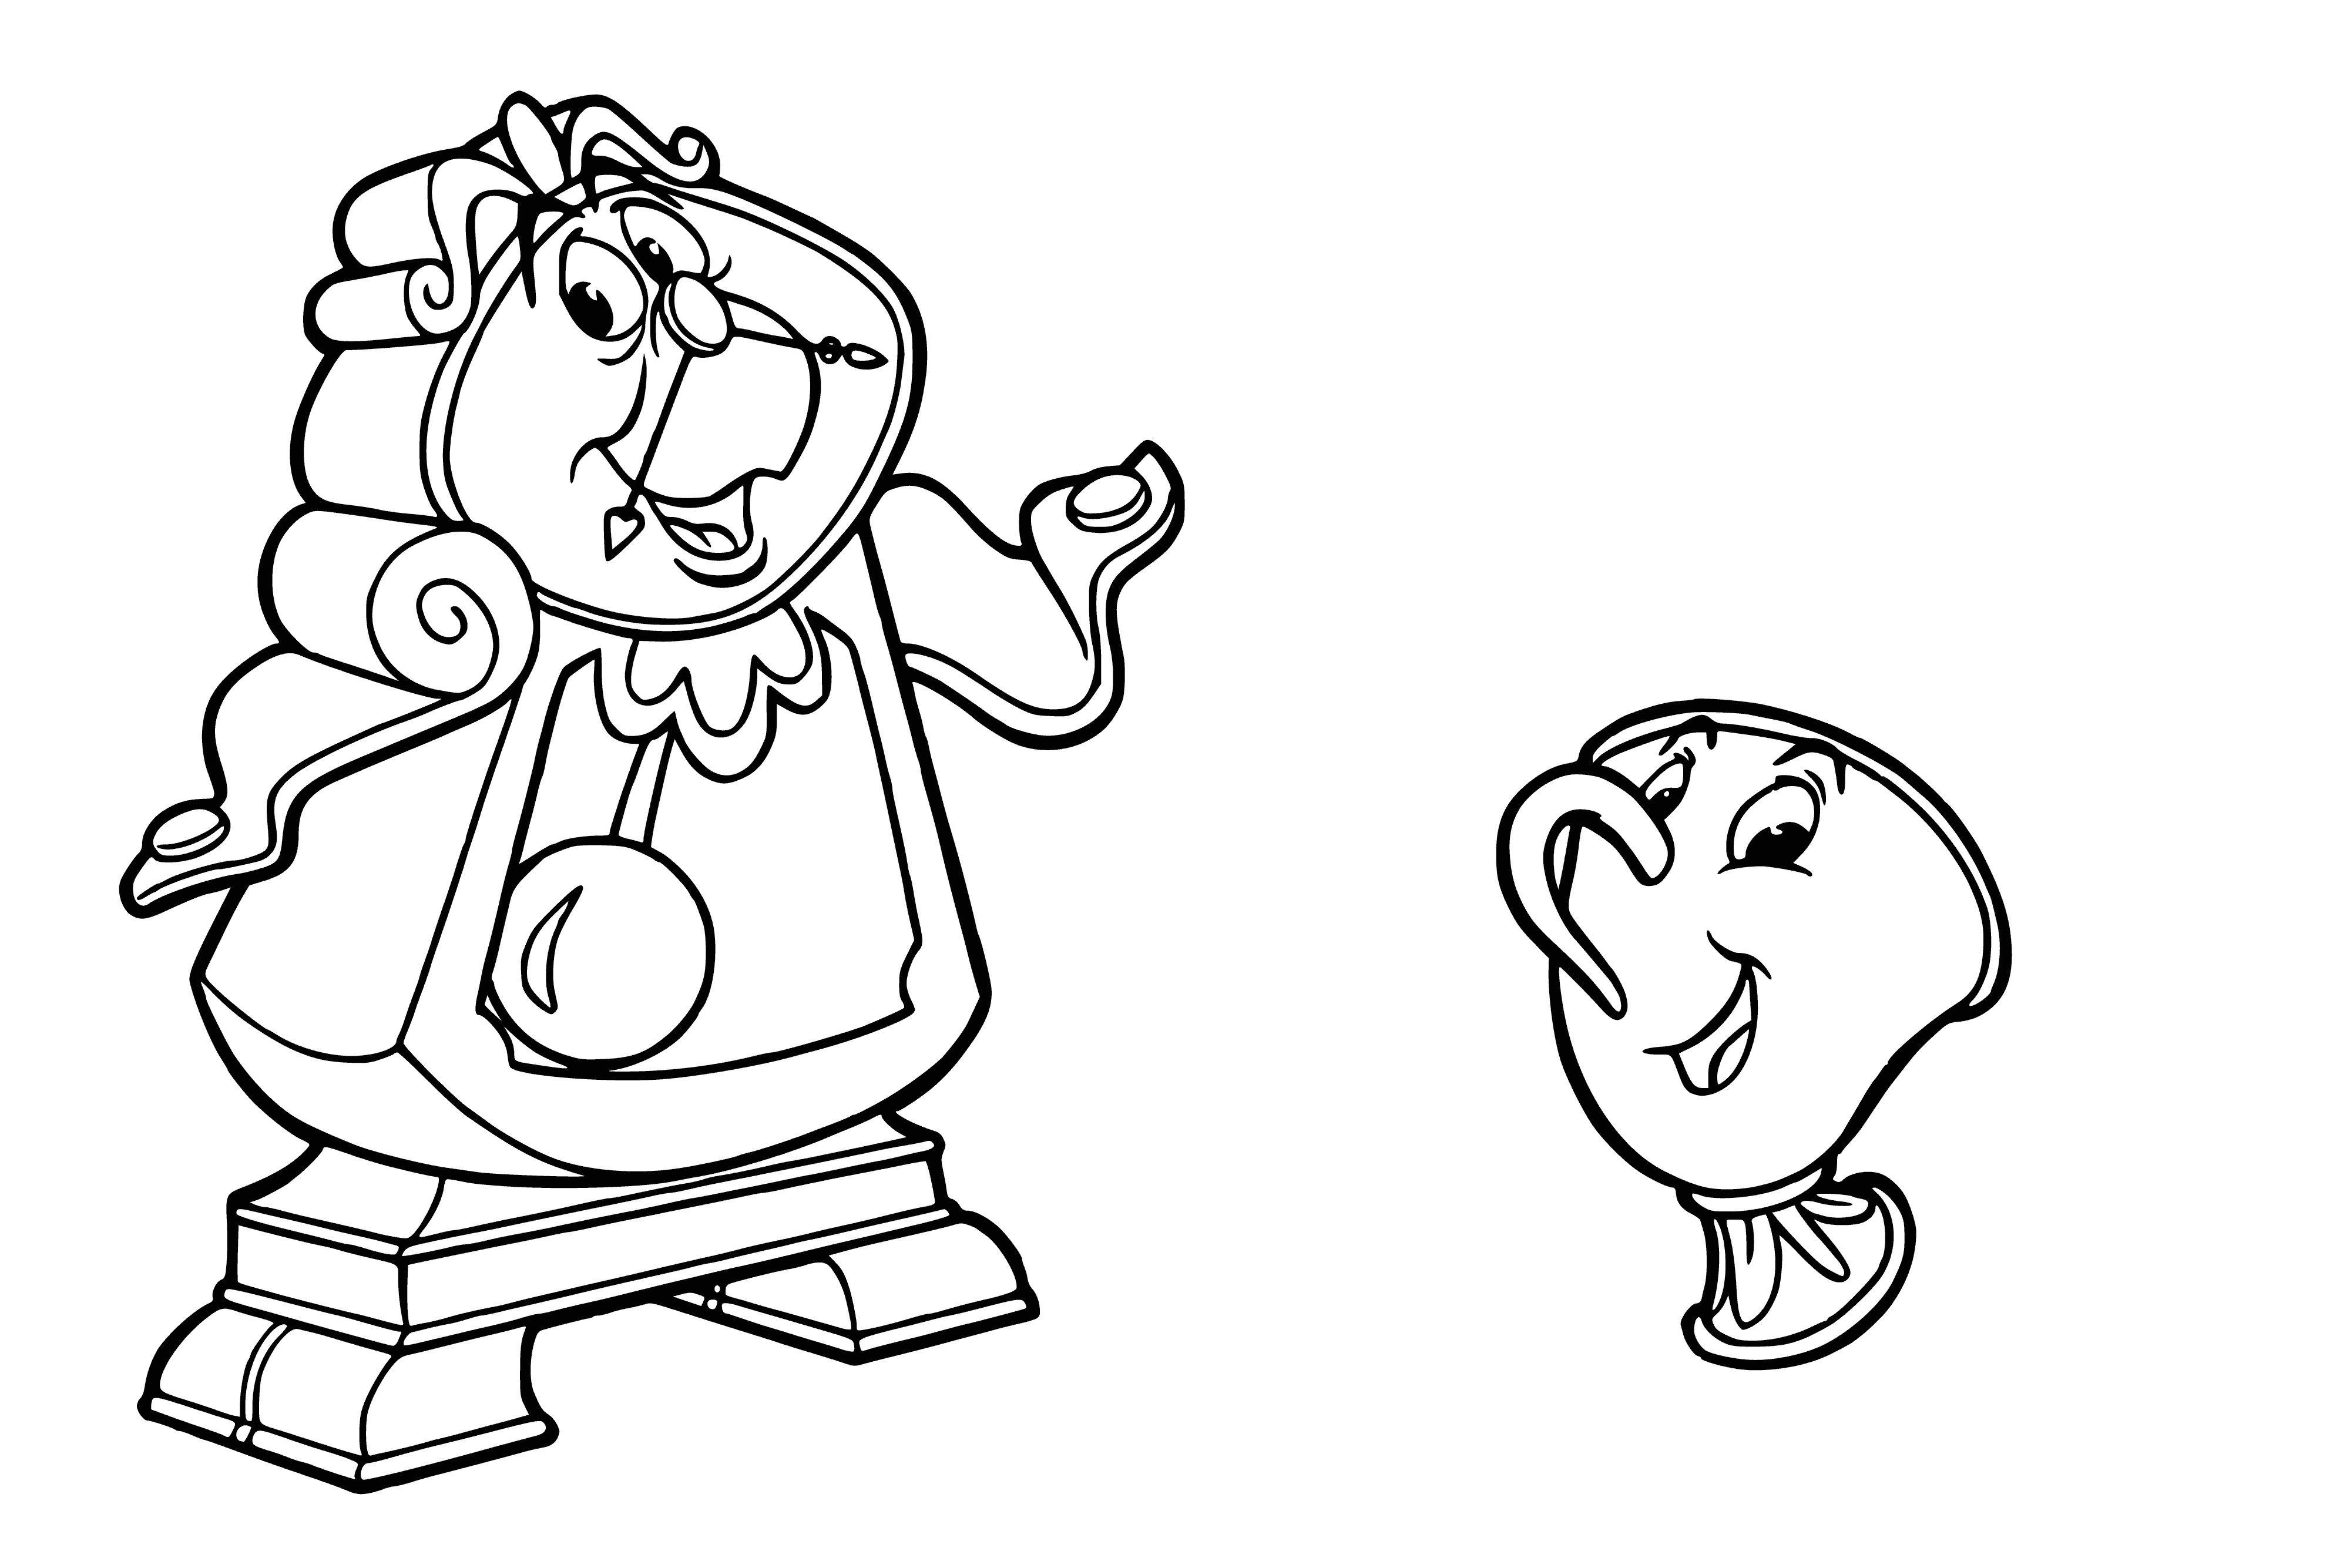 Butler Cogsworth and Chip coloring page